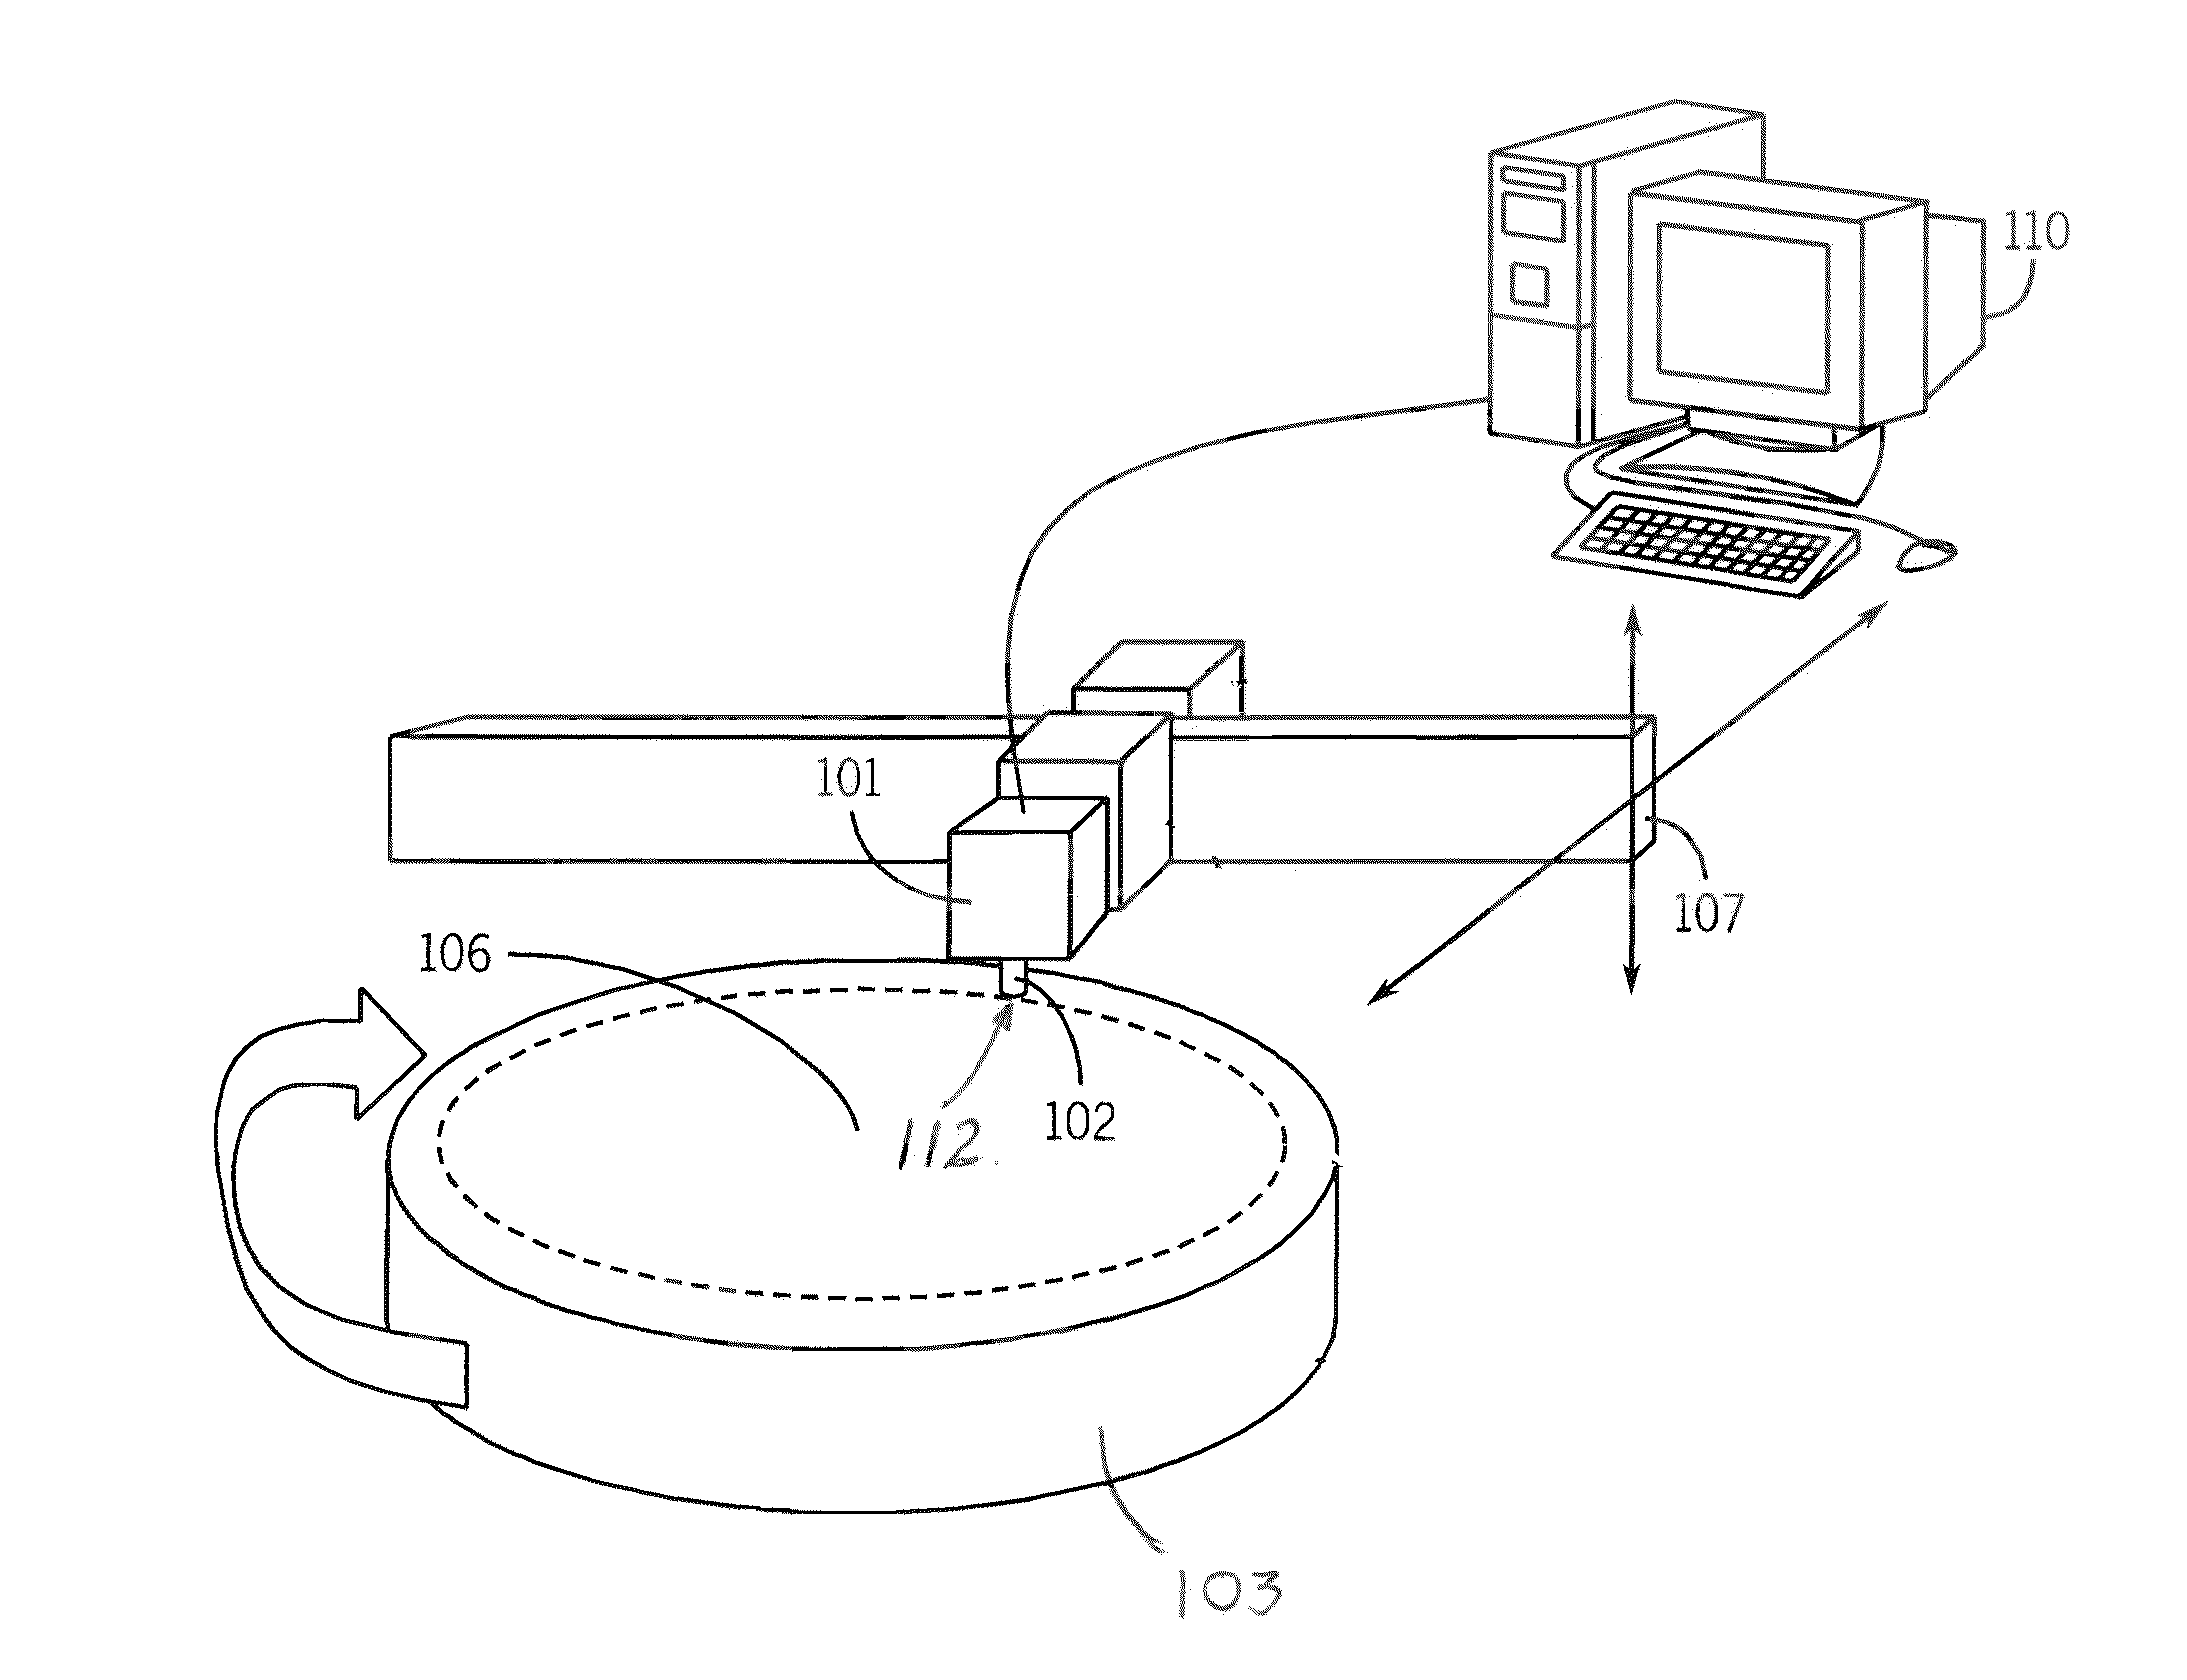 Patterned wafer inspection system using a non-vibrating contact potential difference sensor